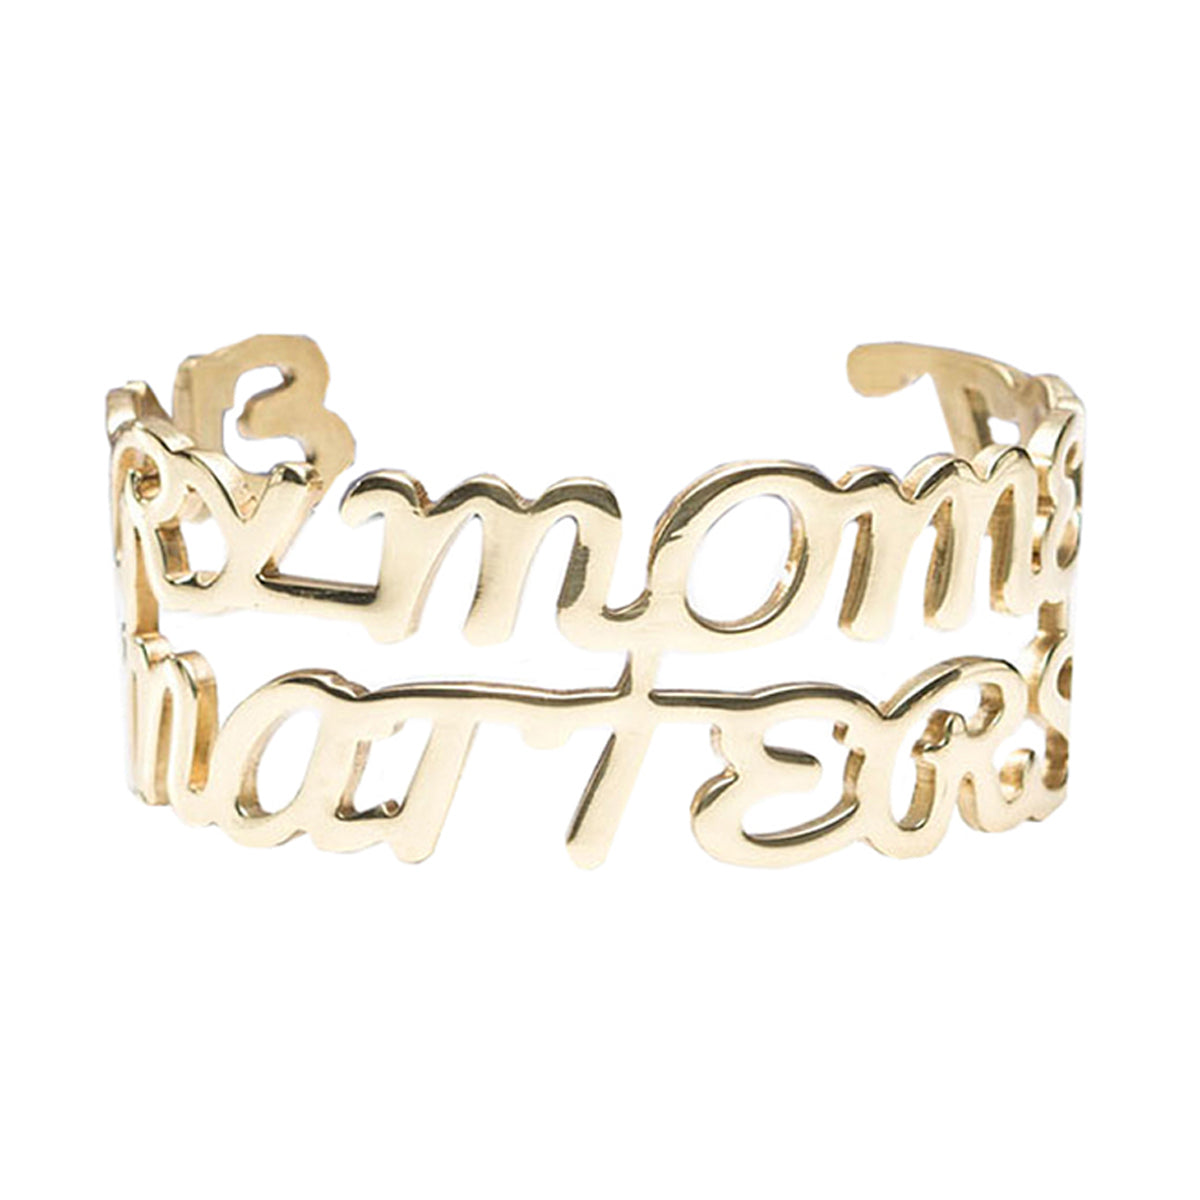 Every Moment Matters Cuff - Gold